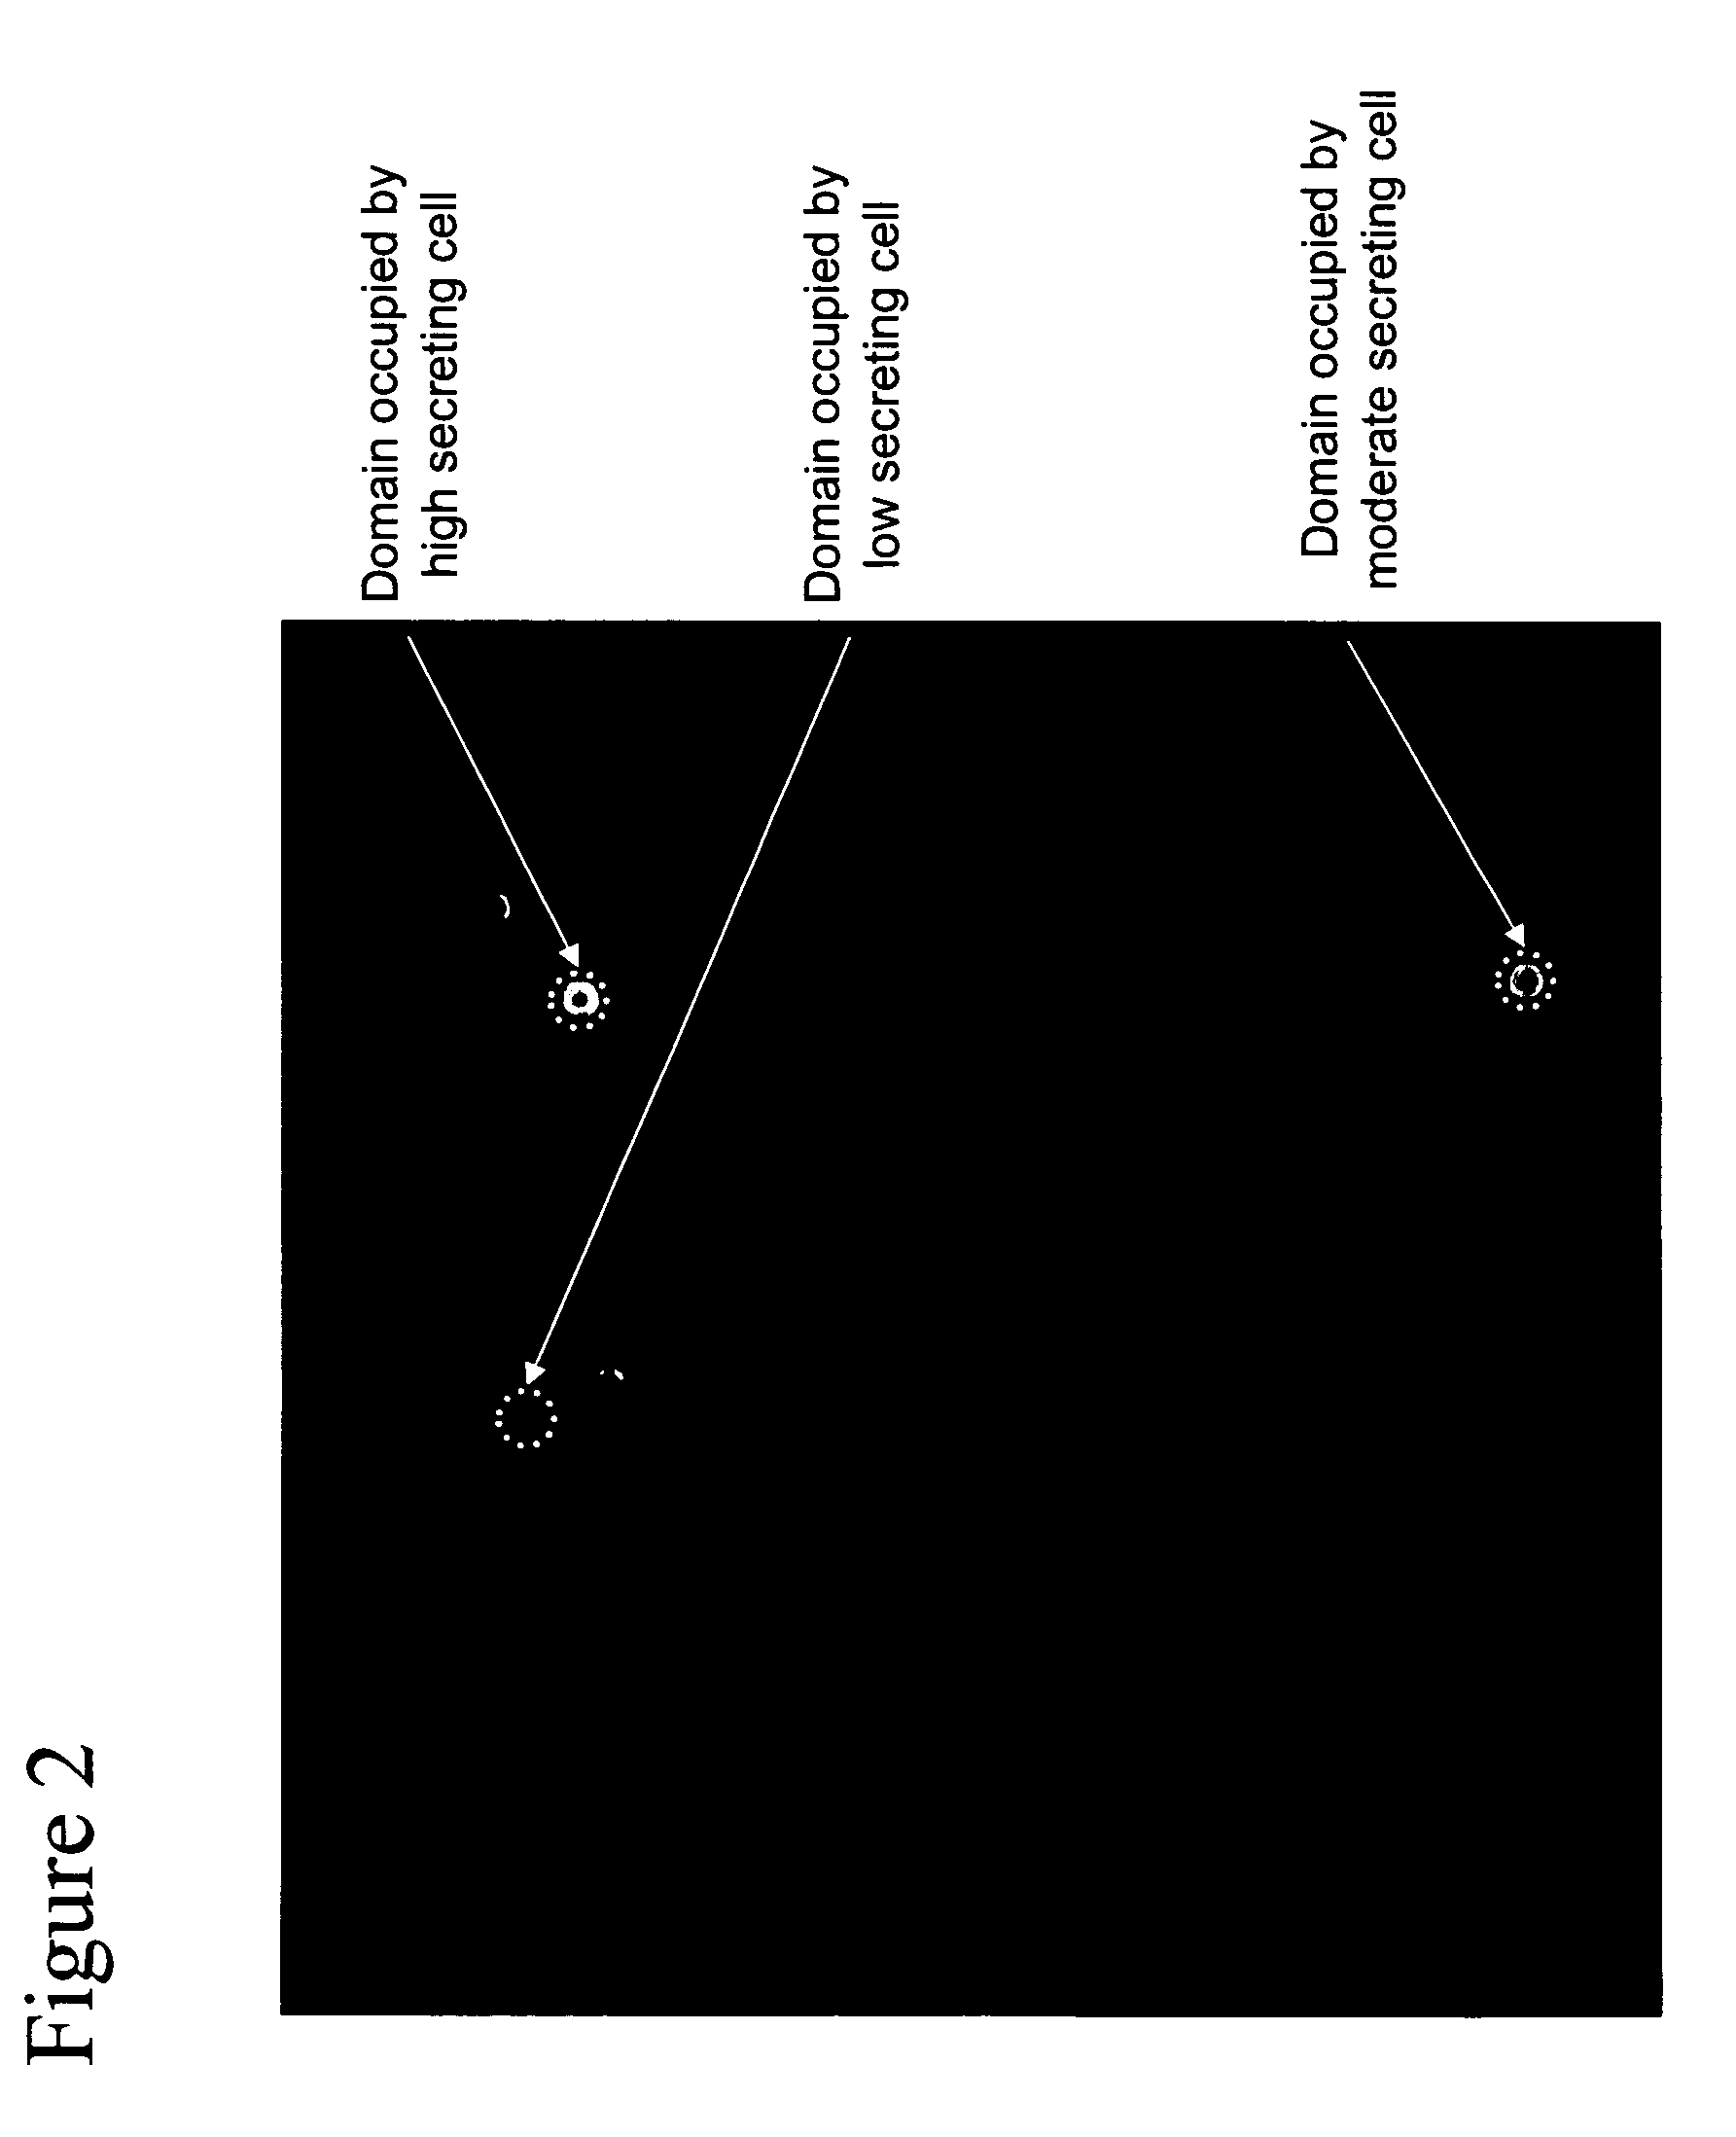 Methods for purification of cells based on product secretion